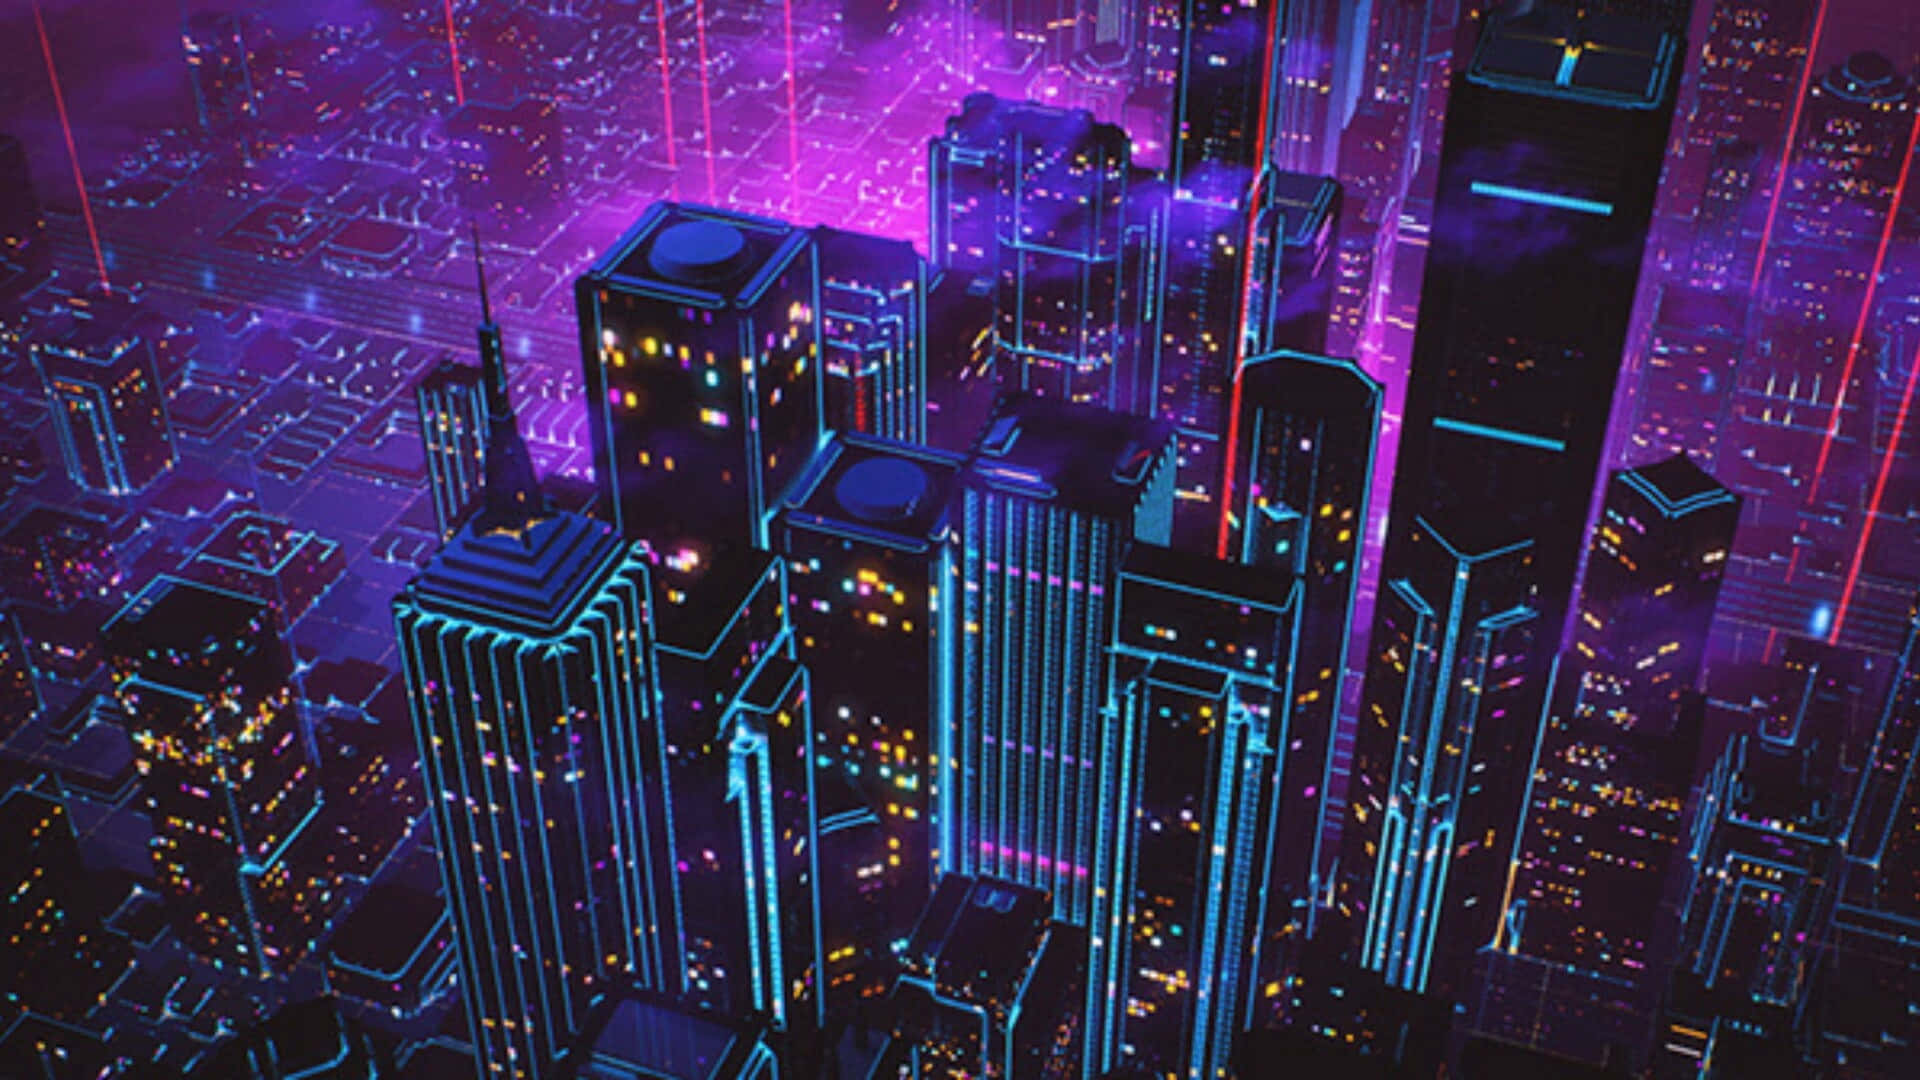 A City With Neon Lights And Buildings